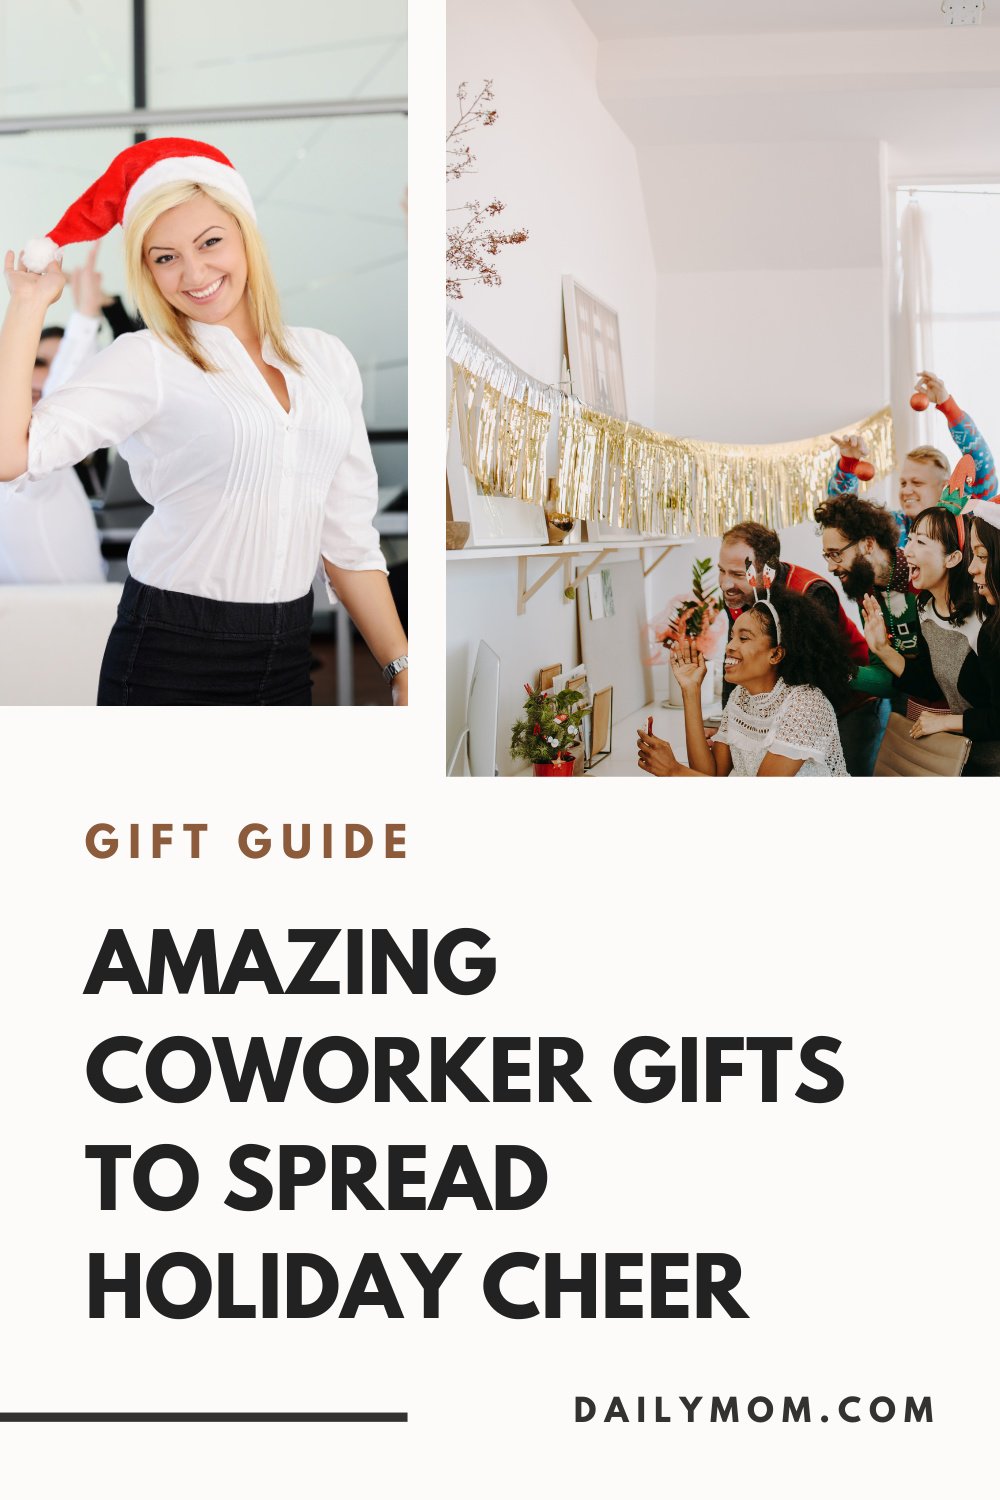 18 Amazing Coworker Gifts To Spread Holiday Cheer 13 Daily Mom, Magazine For Families